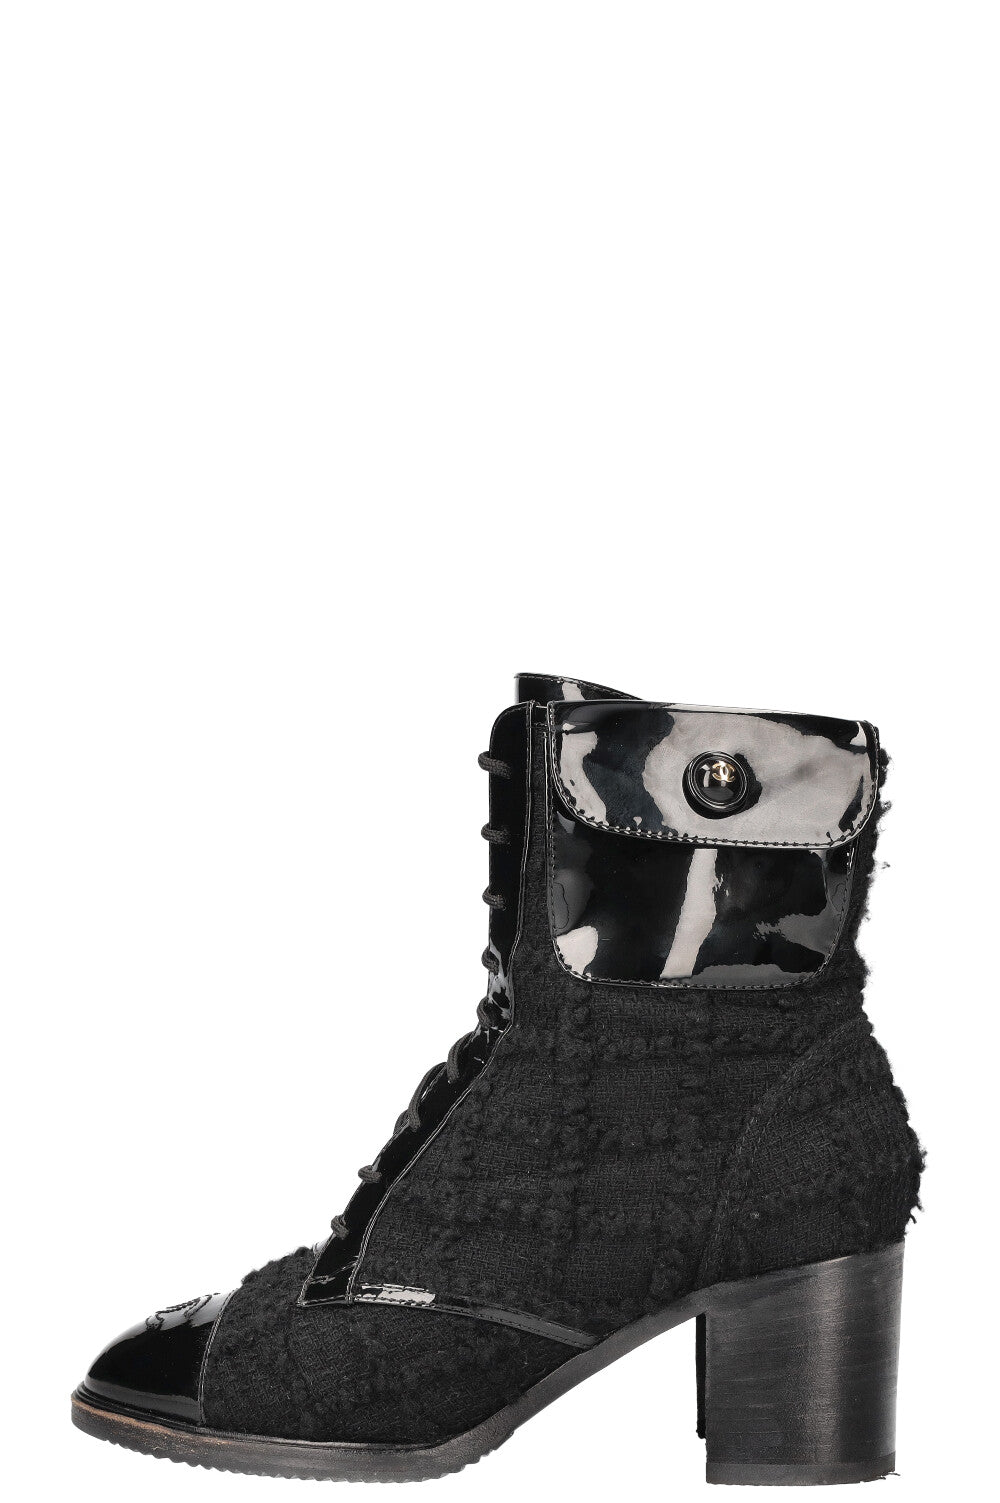 CHANEL Ankle Boots Tweed Patent Cap Black